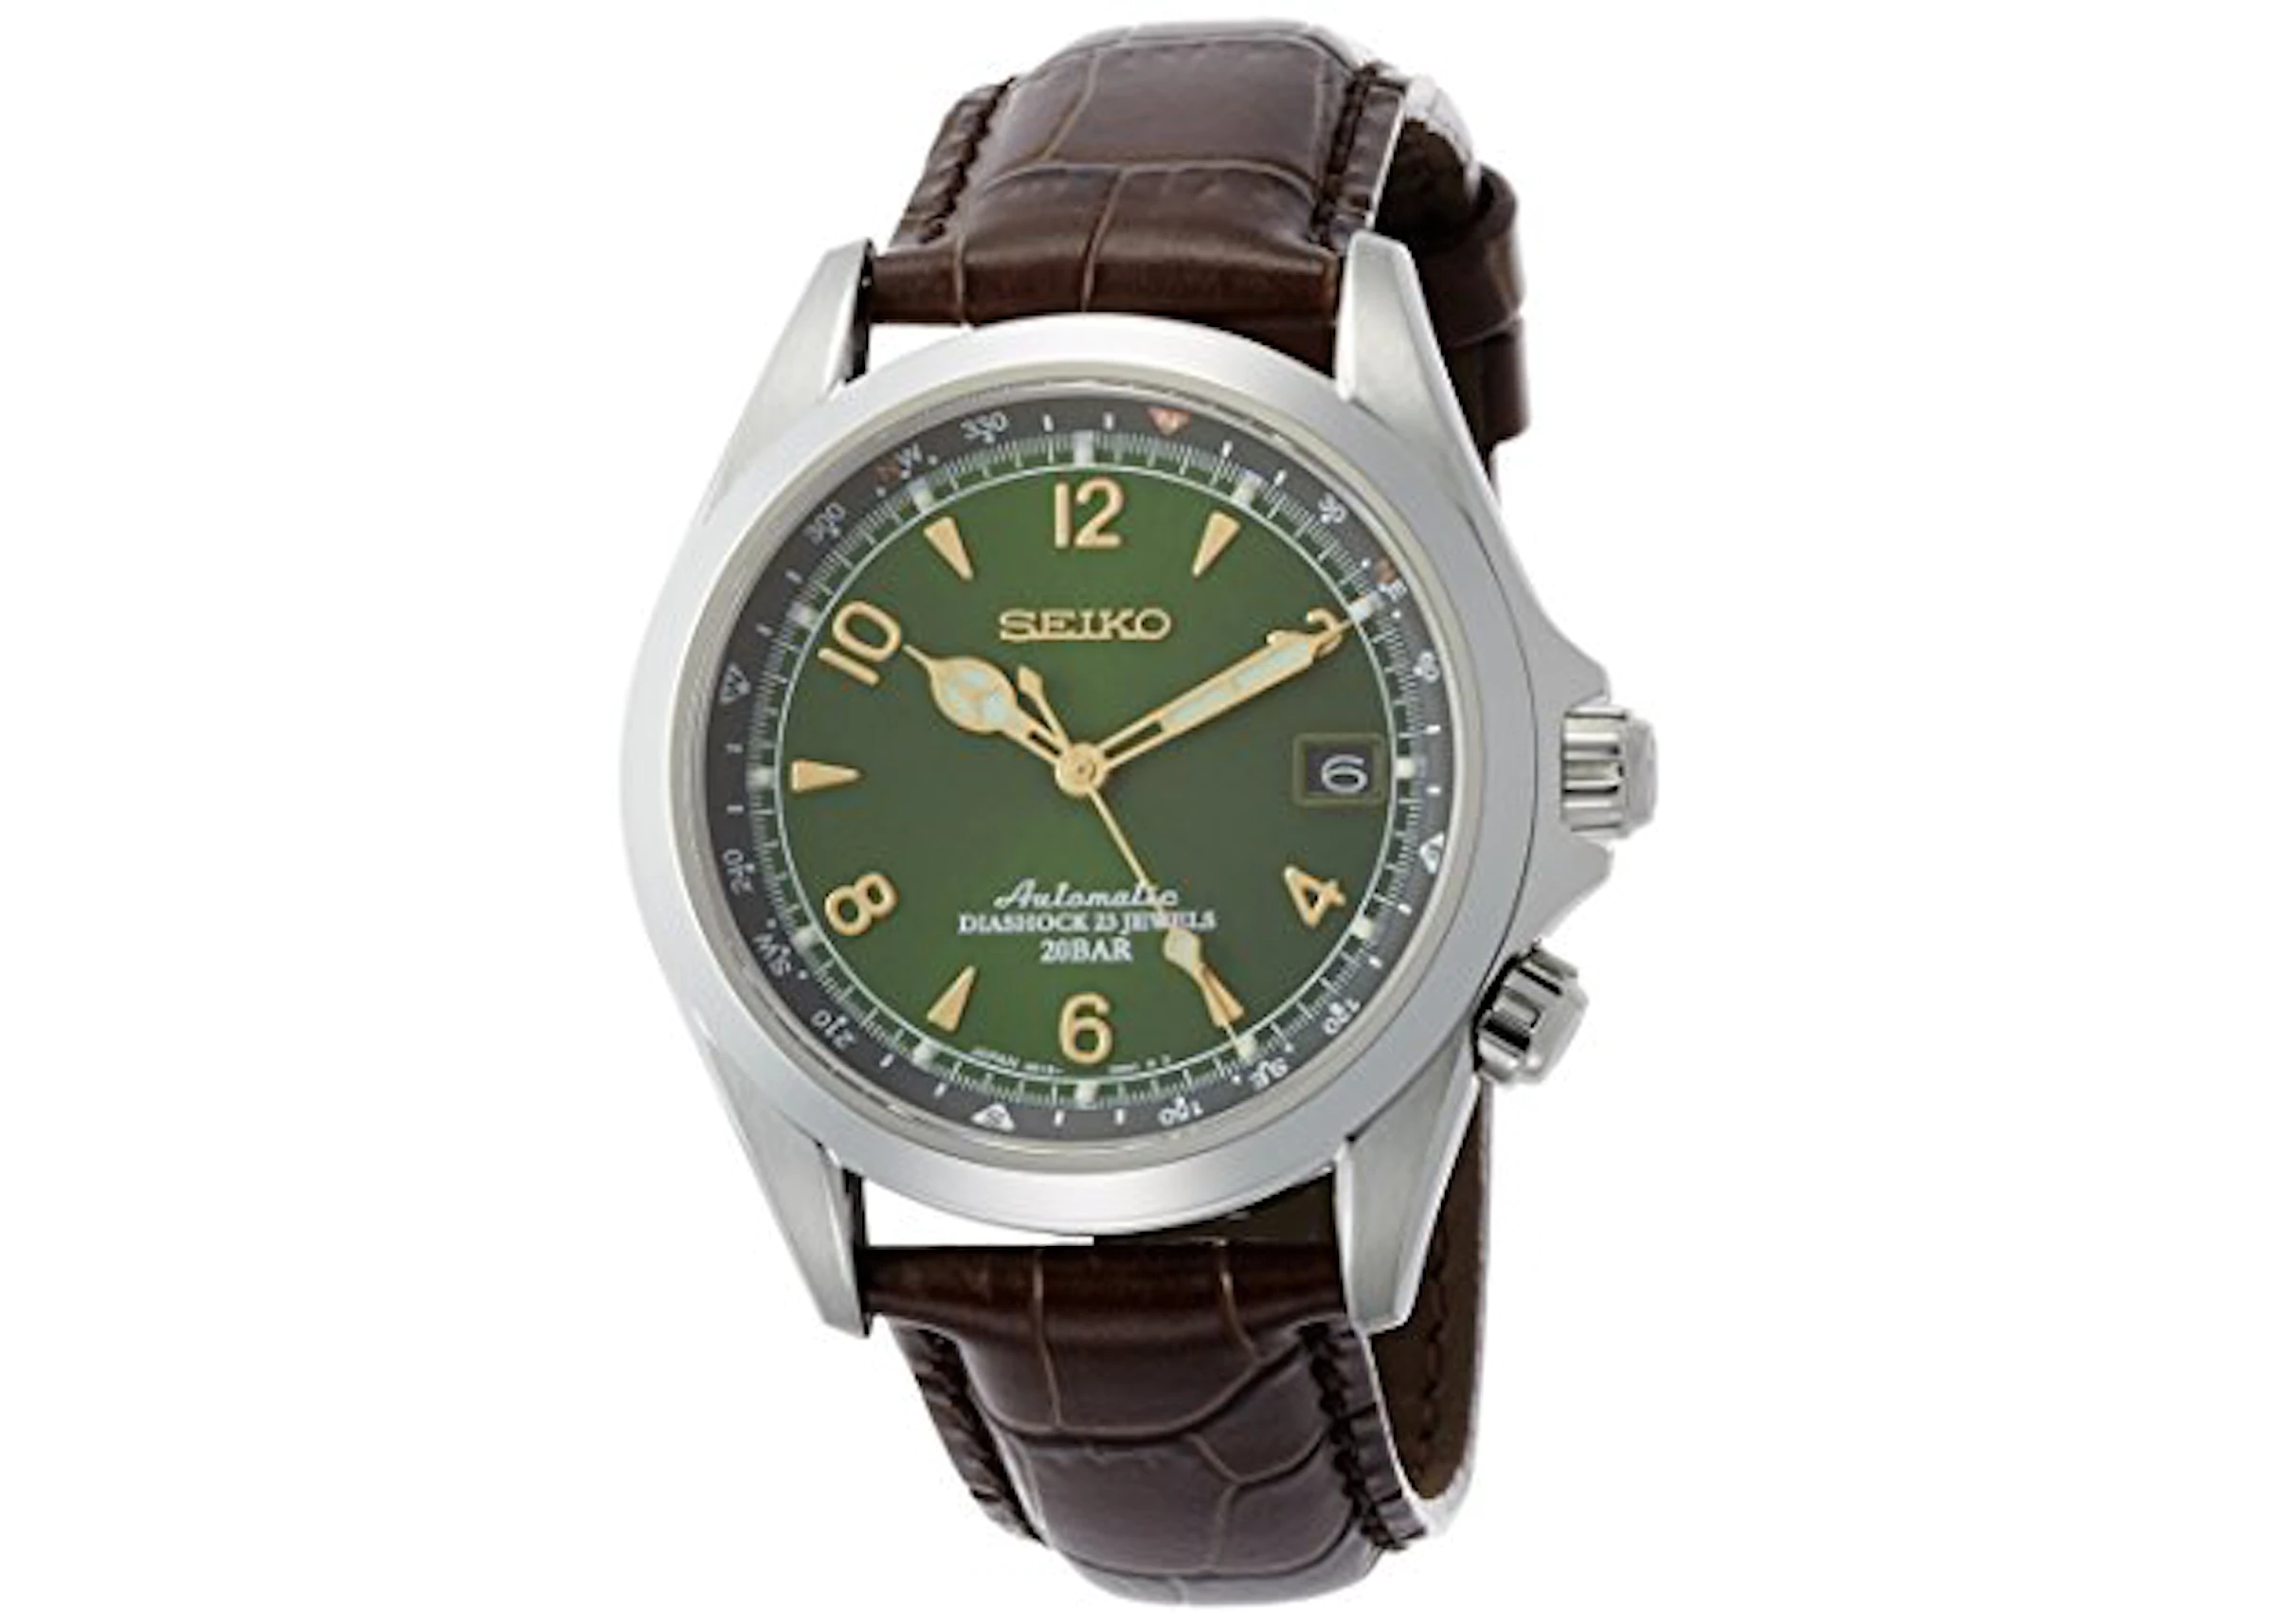 Seiko Alpinist SARB017 - 38mm in Stainless Steel - US